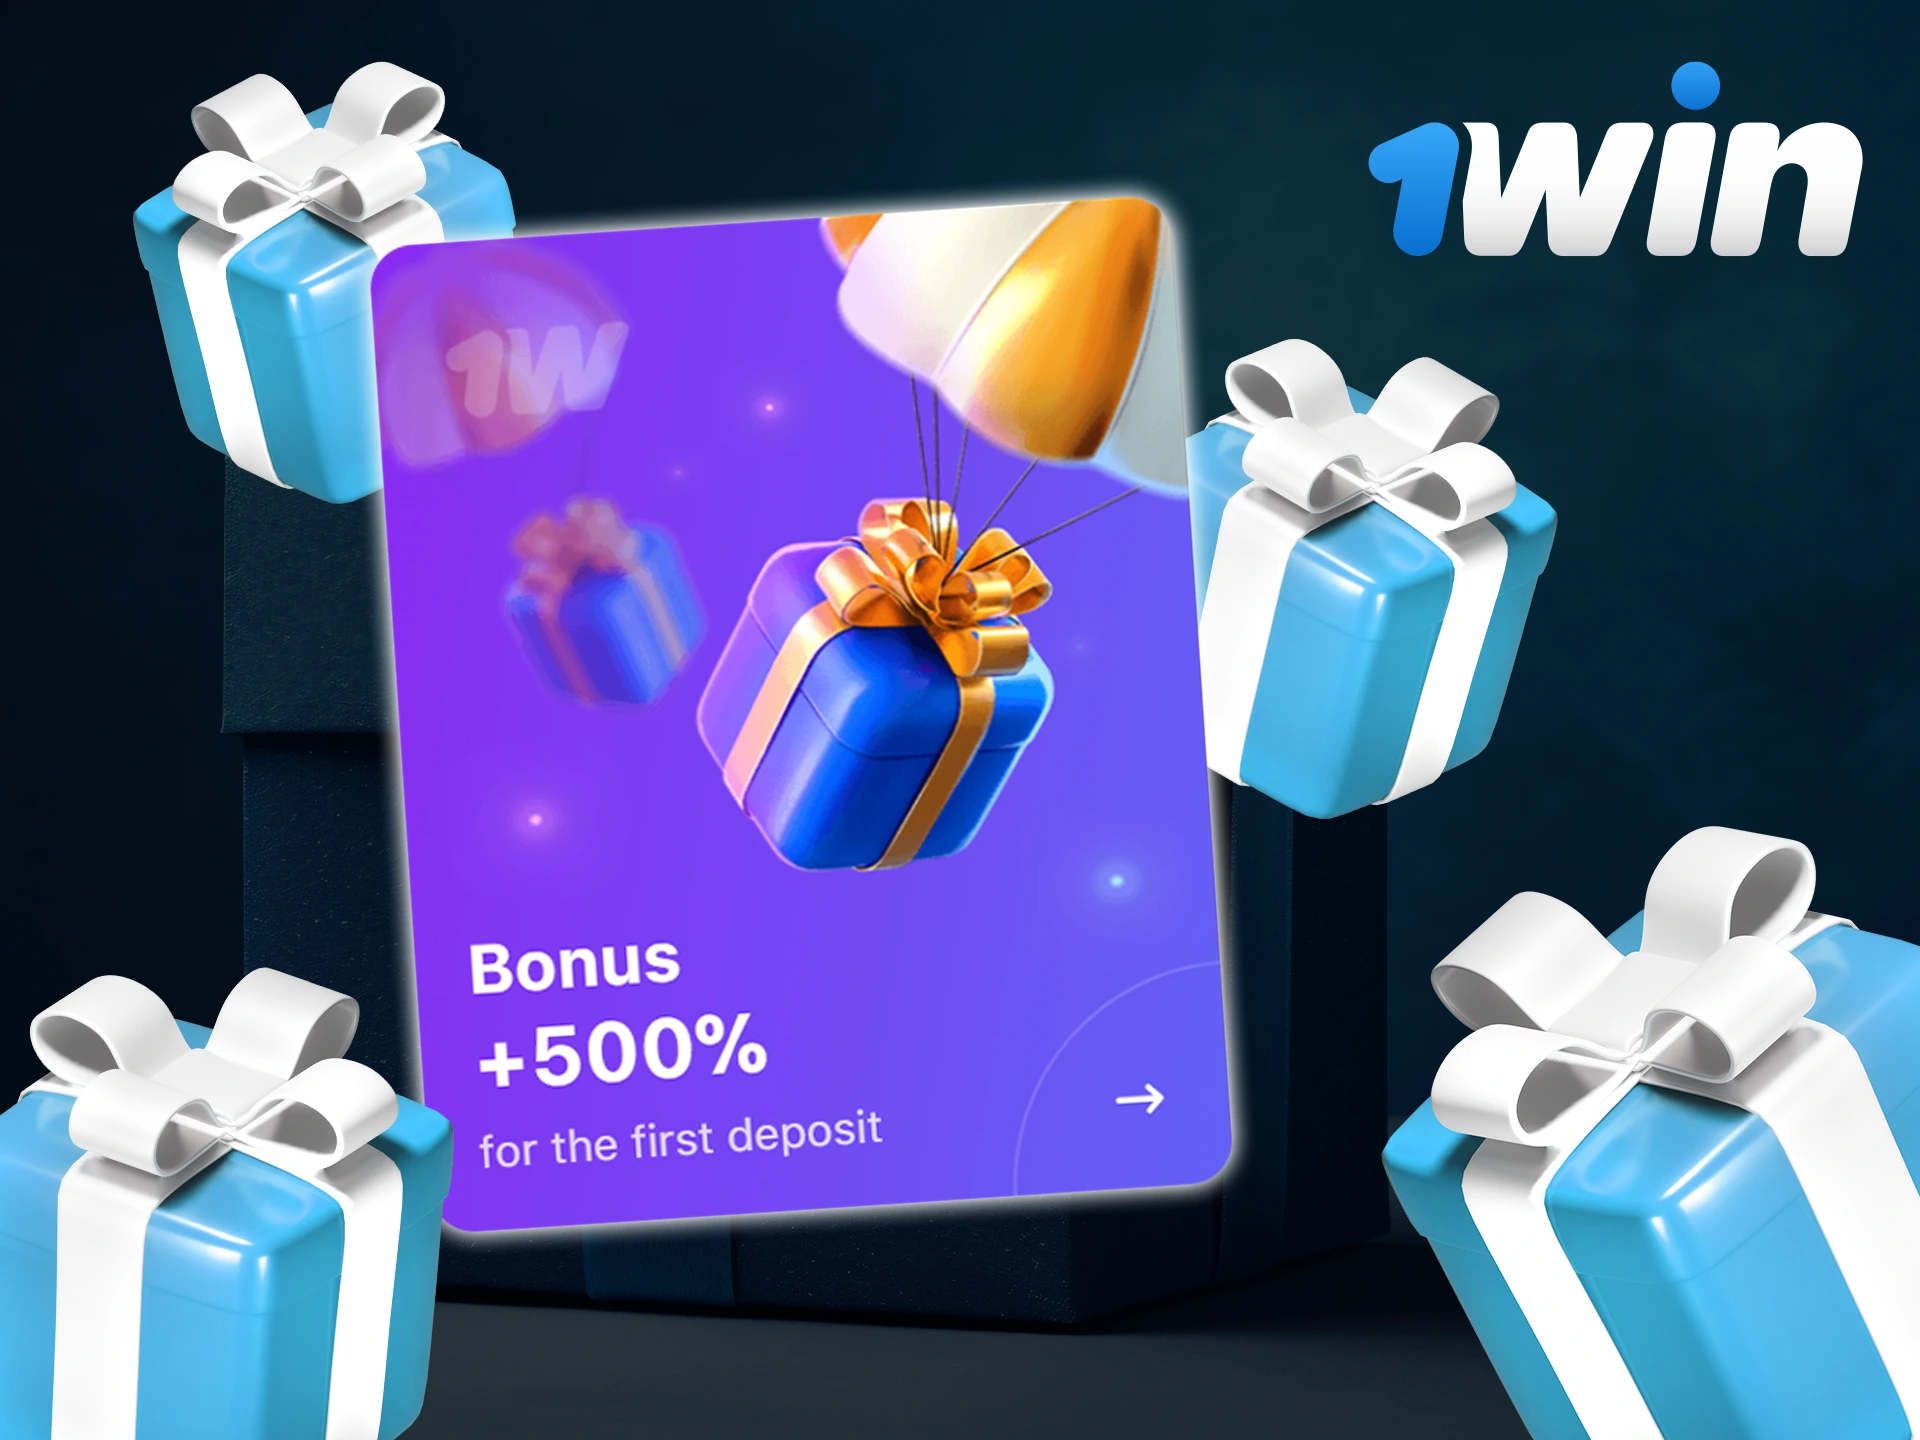 Get a 1Win welcome bonus on your first 4 deposits.